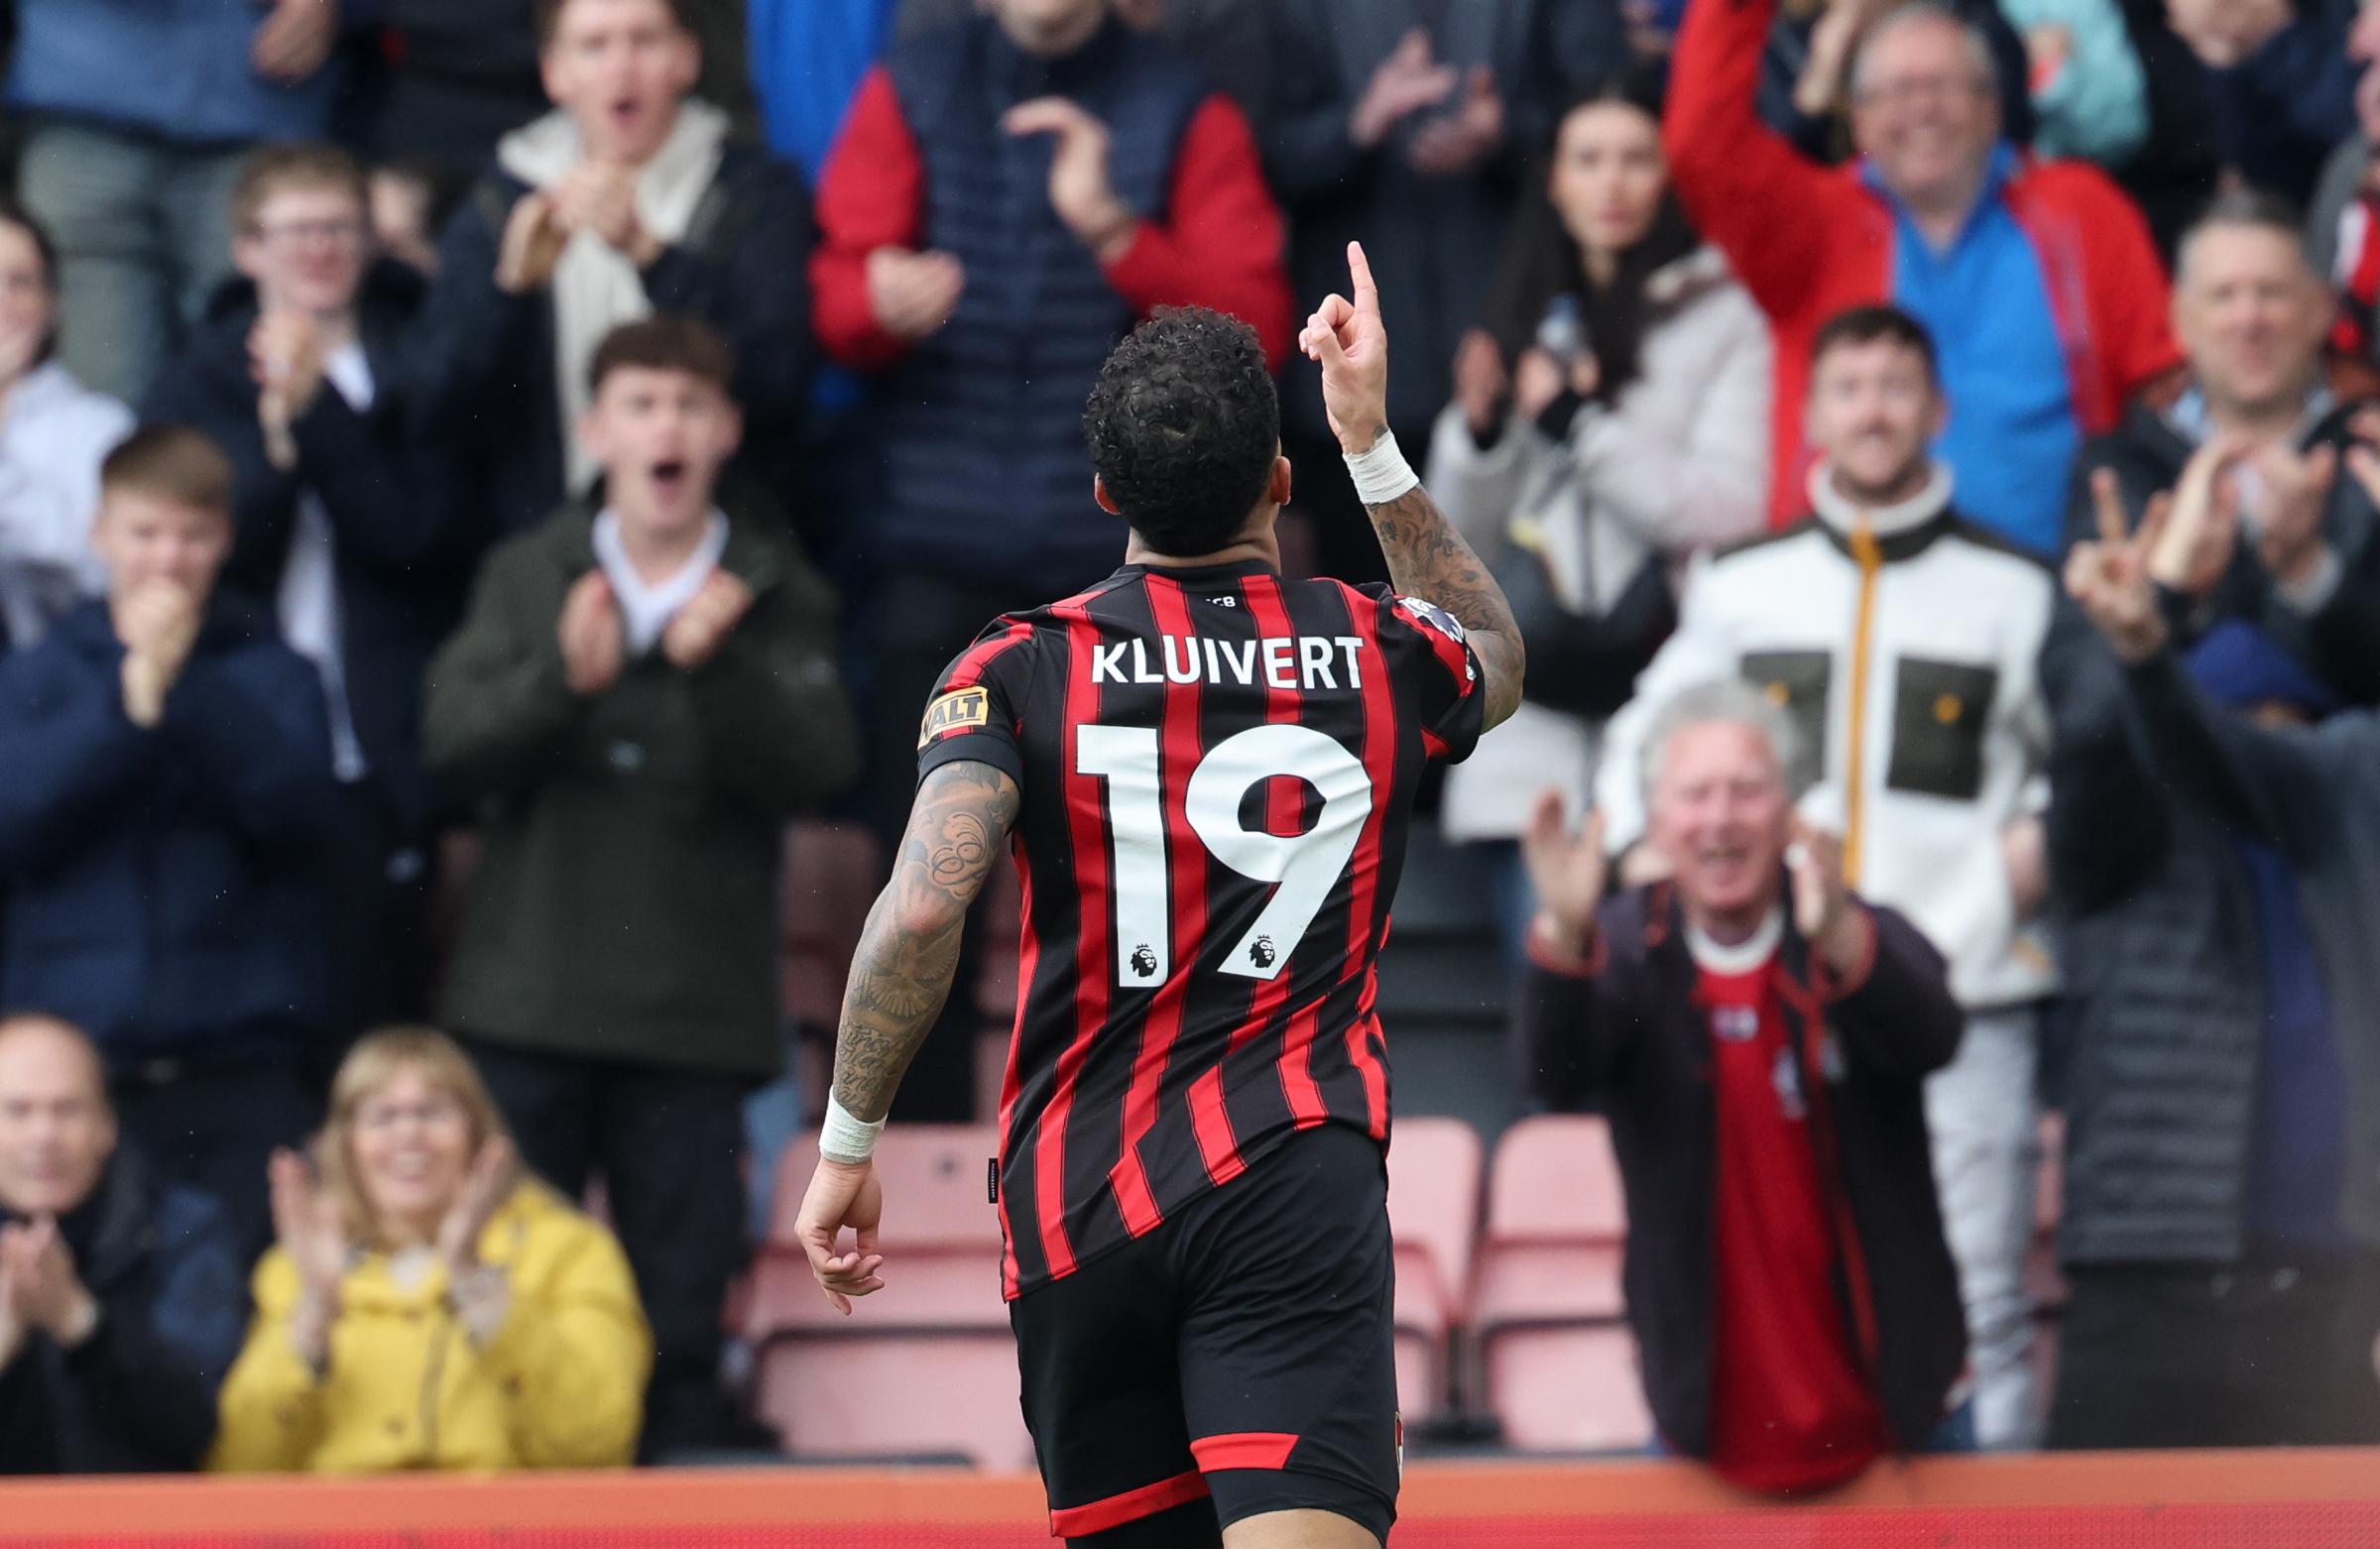 Justin Kluivert on AFC Bournemouth's top 10 chances in Premier League